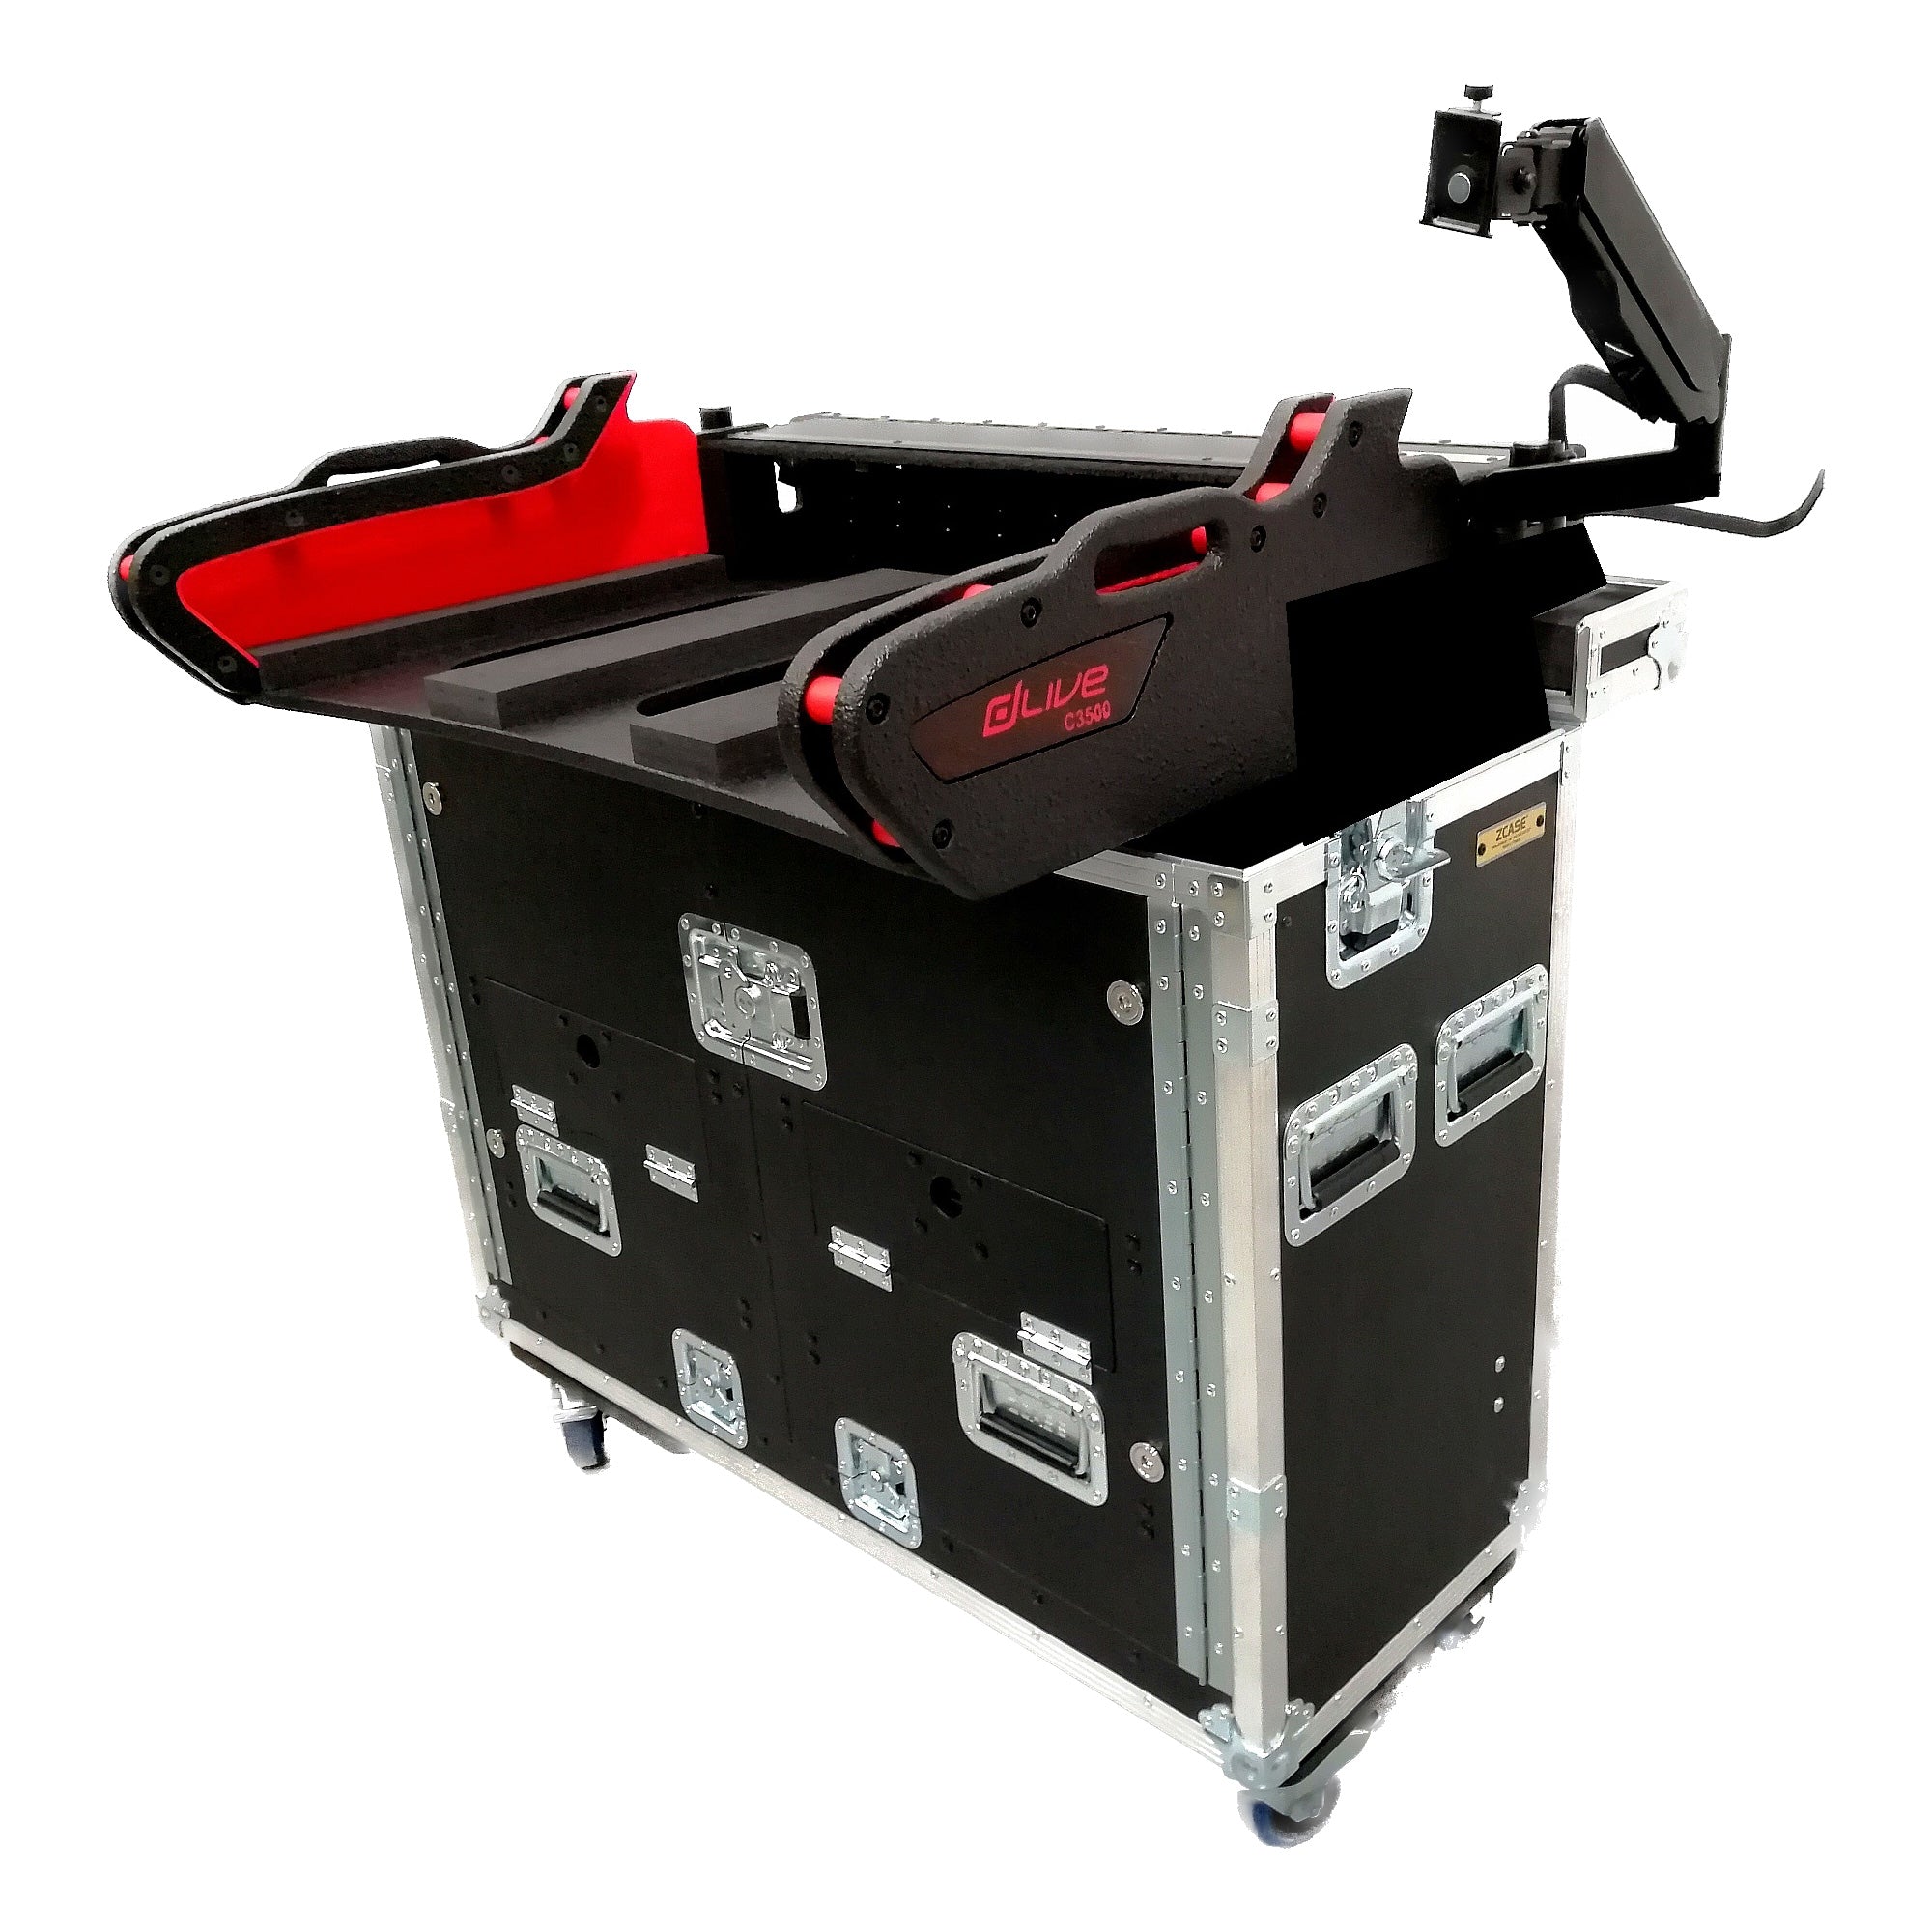 Pro X For Allen and Heath DLive C3500 Flip-Ready Hydraulic Console Easy Retracting Lifting Detachable Case by ZCASE XZF-AH-C3500 D